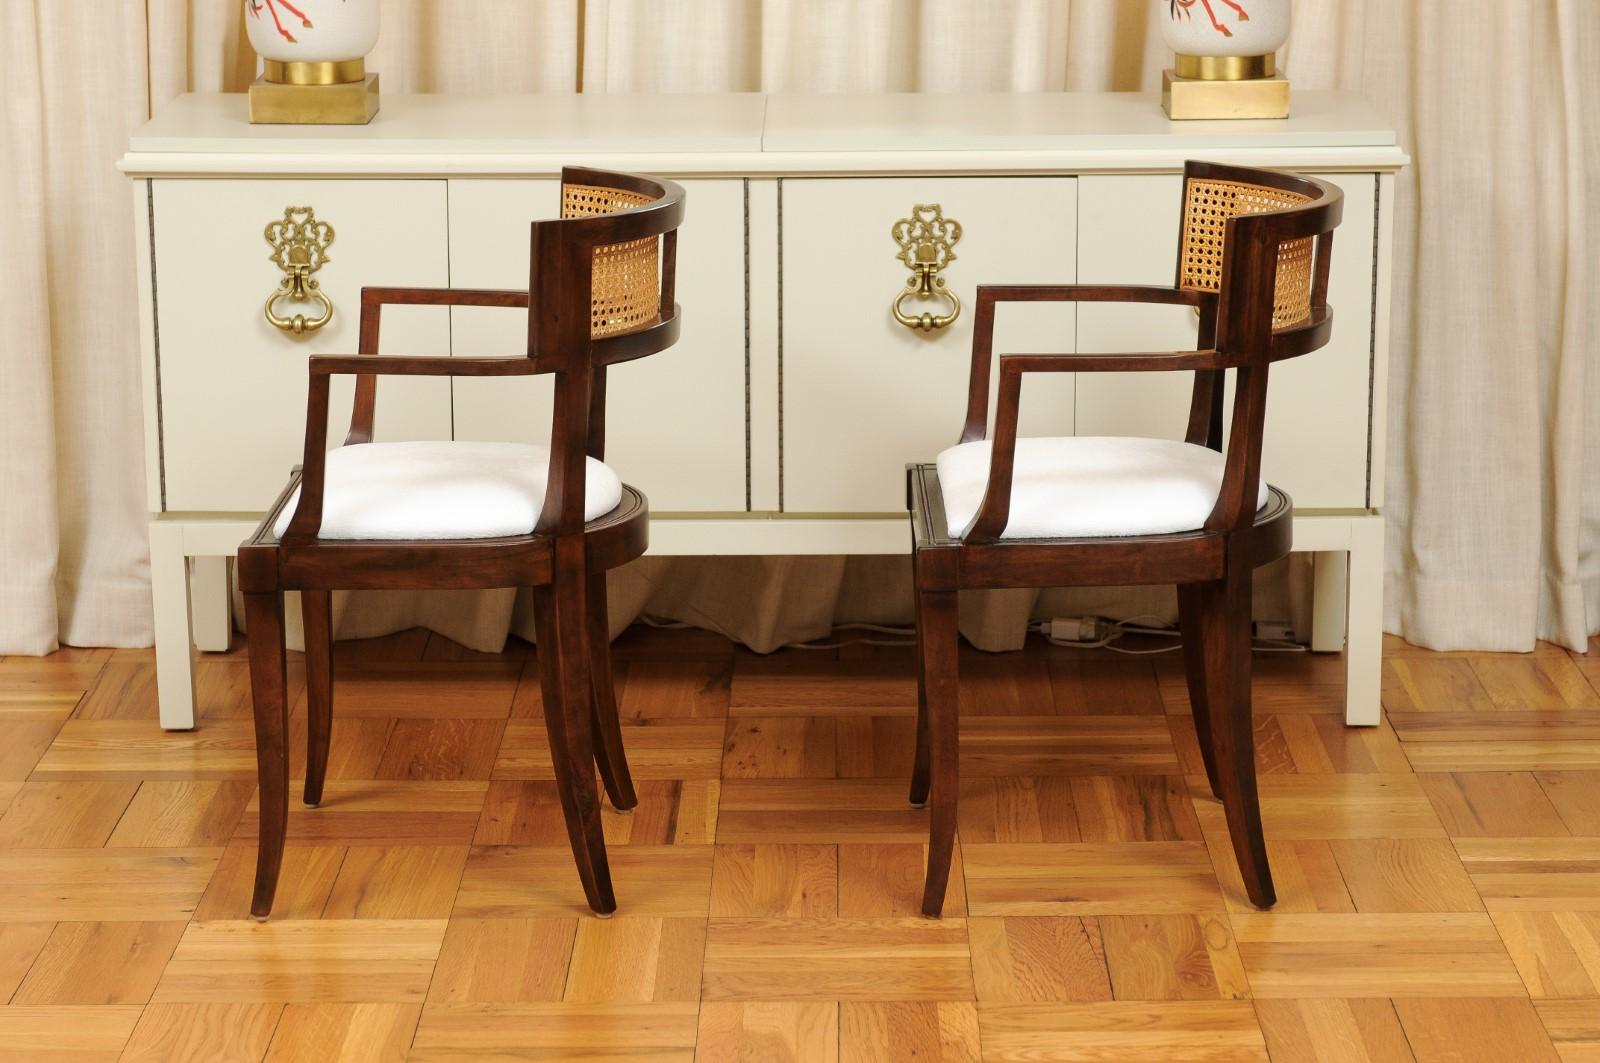 All Arms, Exquisite Set of 20 Klismos Cane Dining Chairs by Baker, circa 1958 For Sale 5